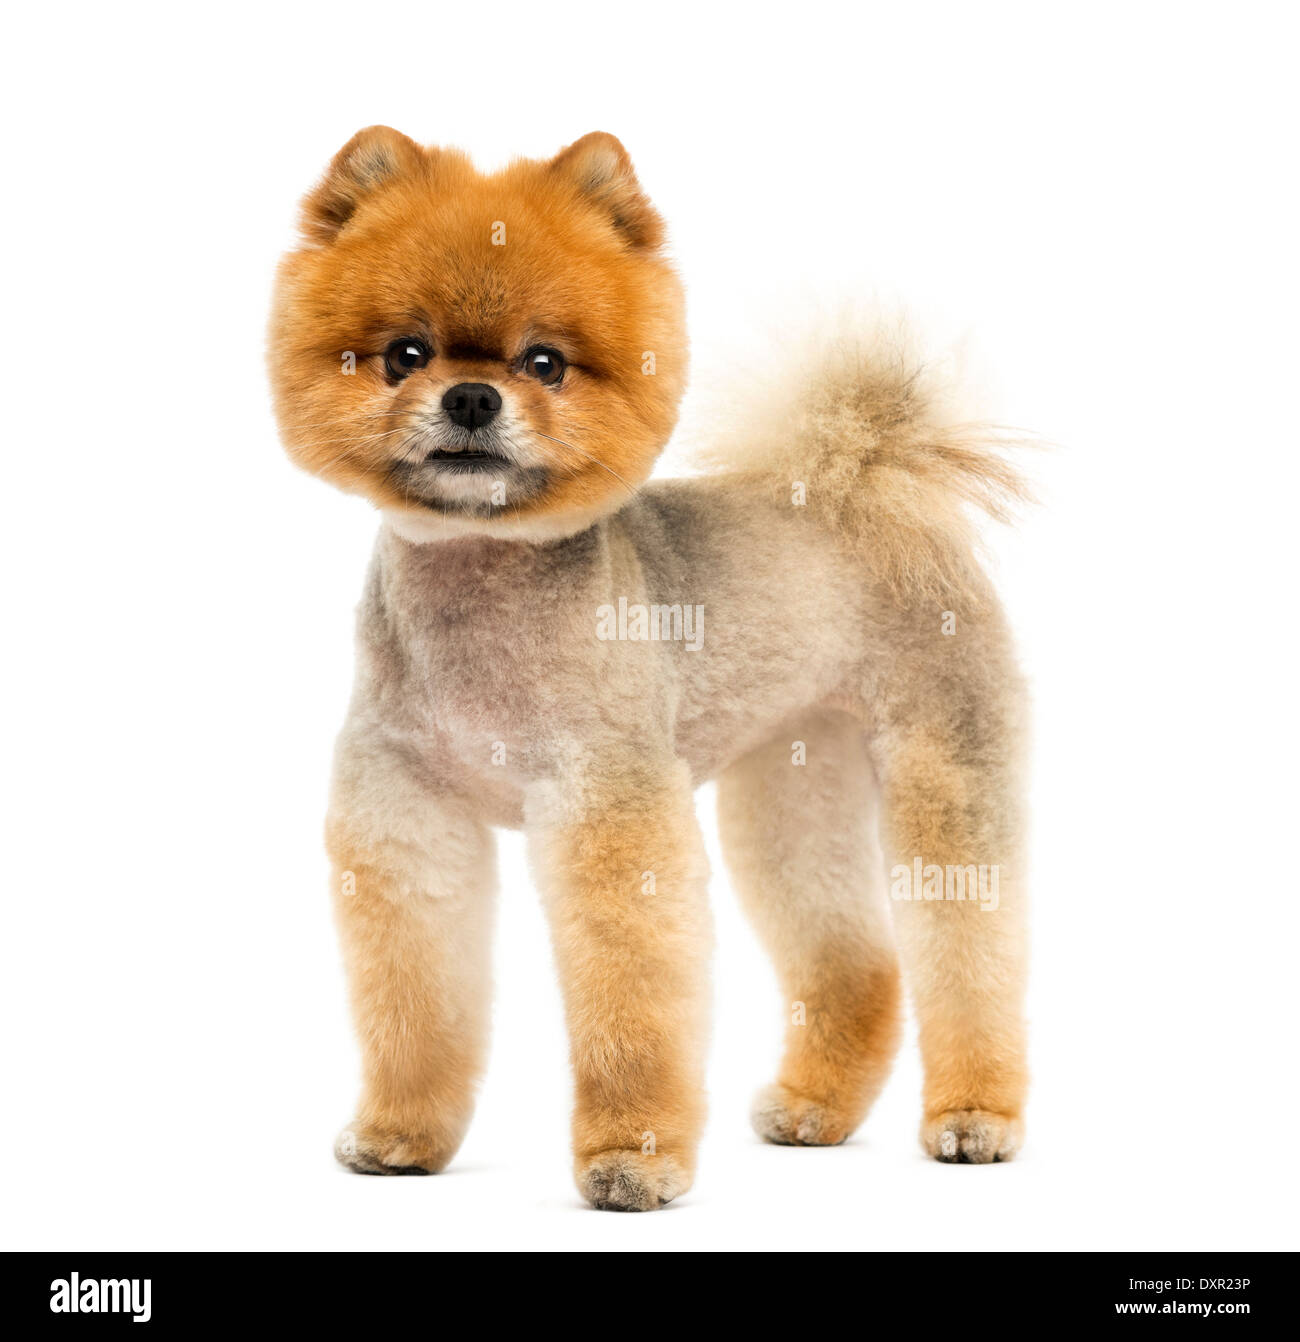 Pomeranian dog sitting and looking at the camera against white background Stock Photo